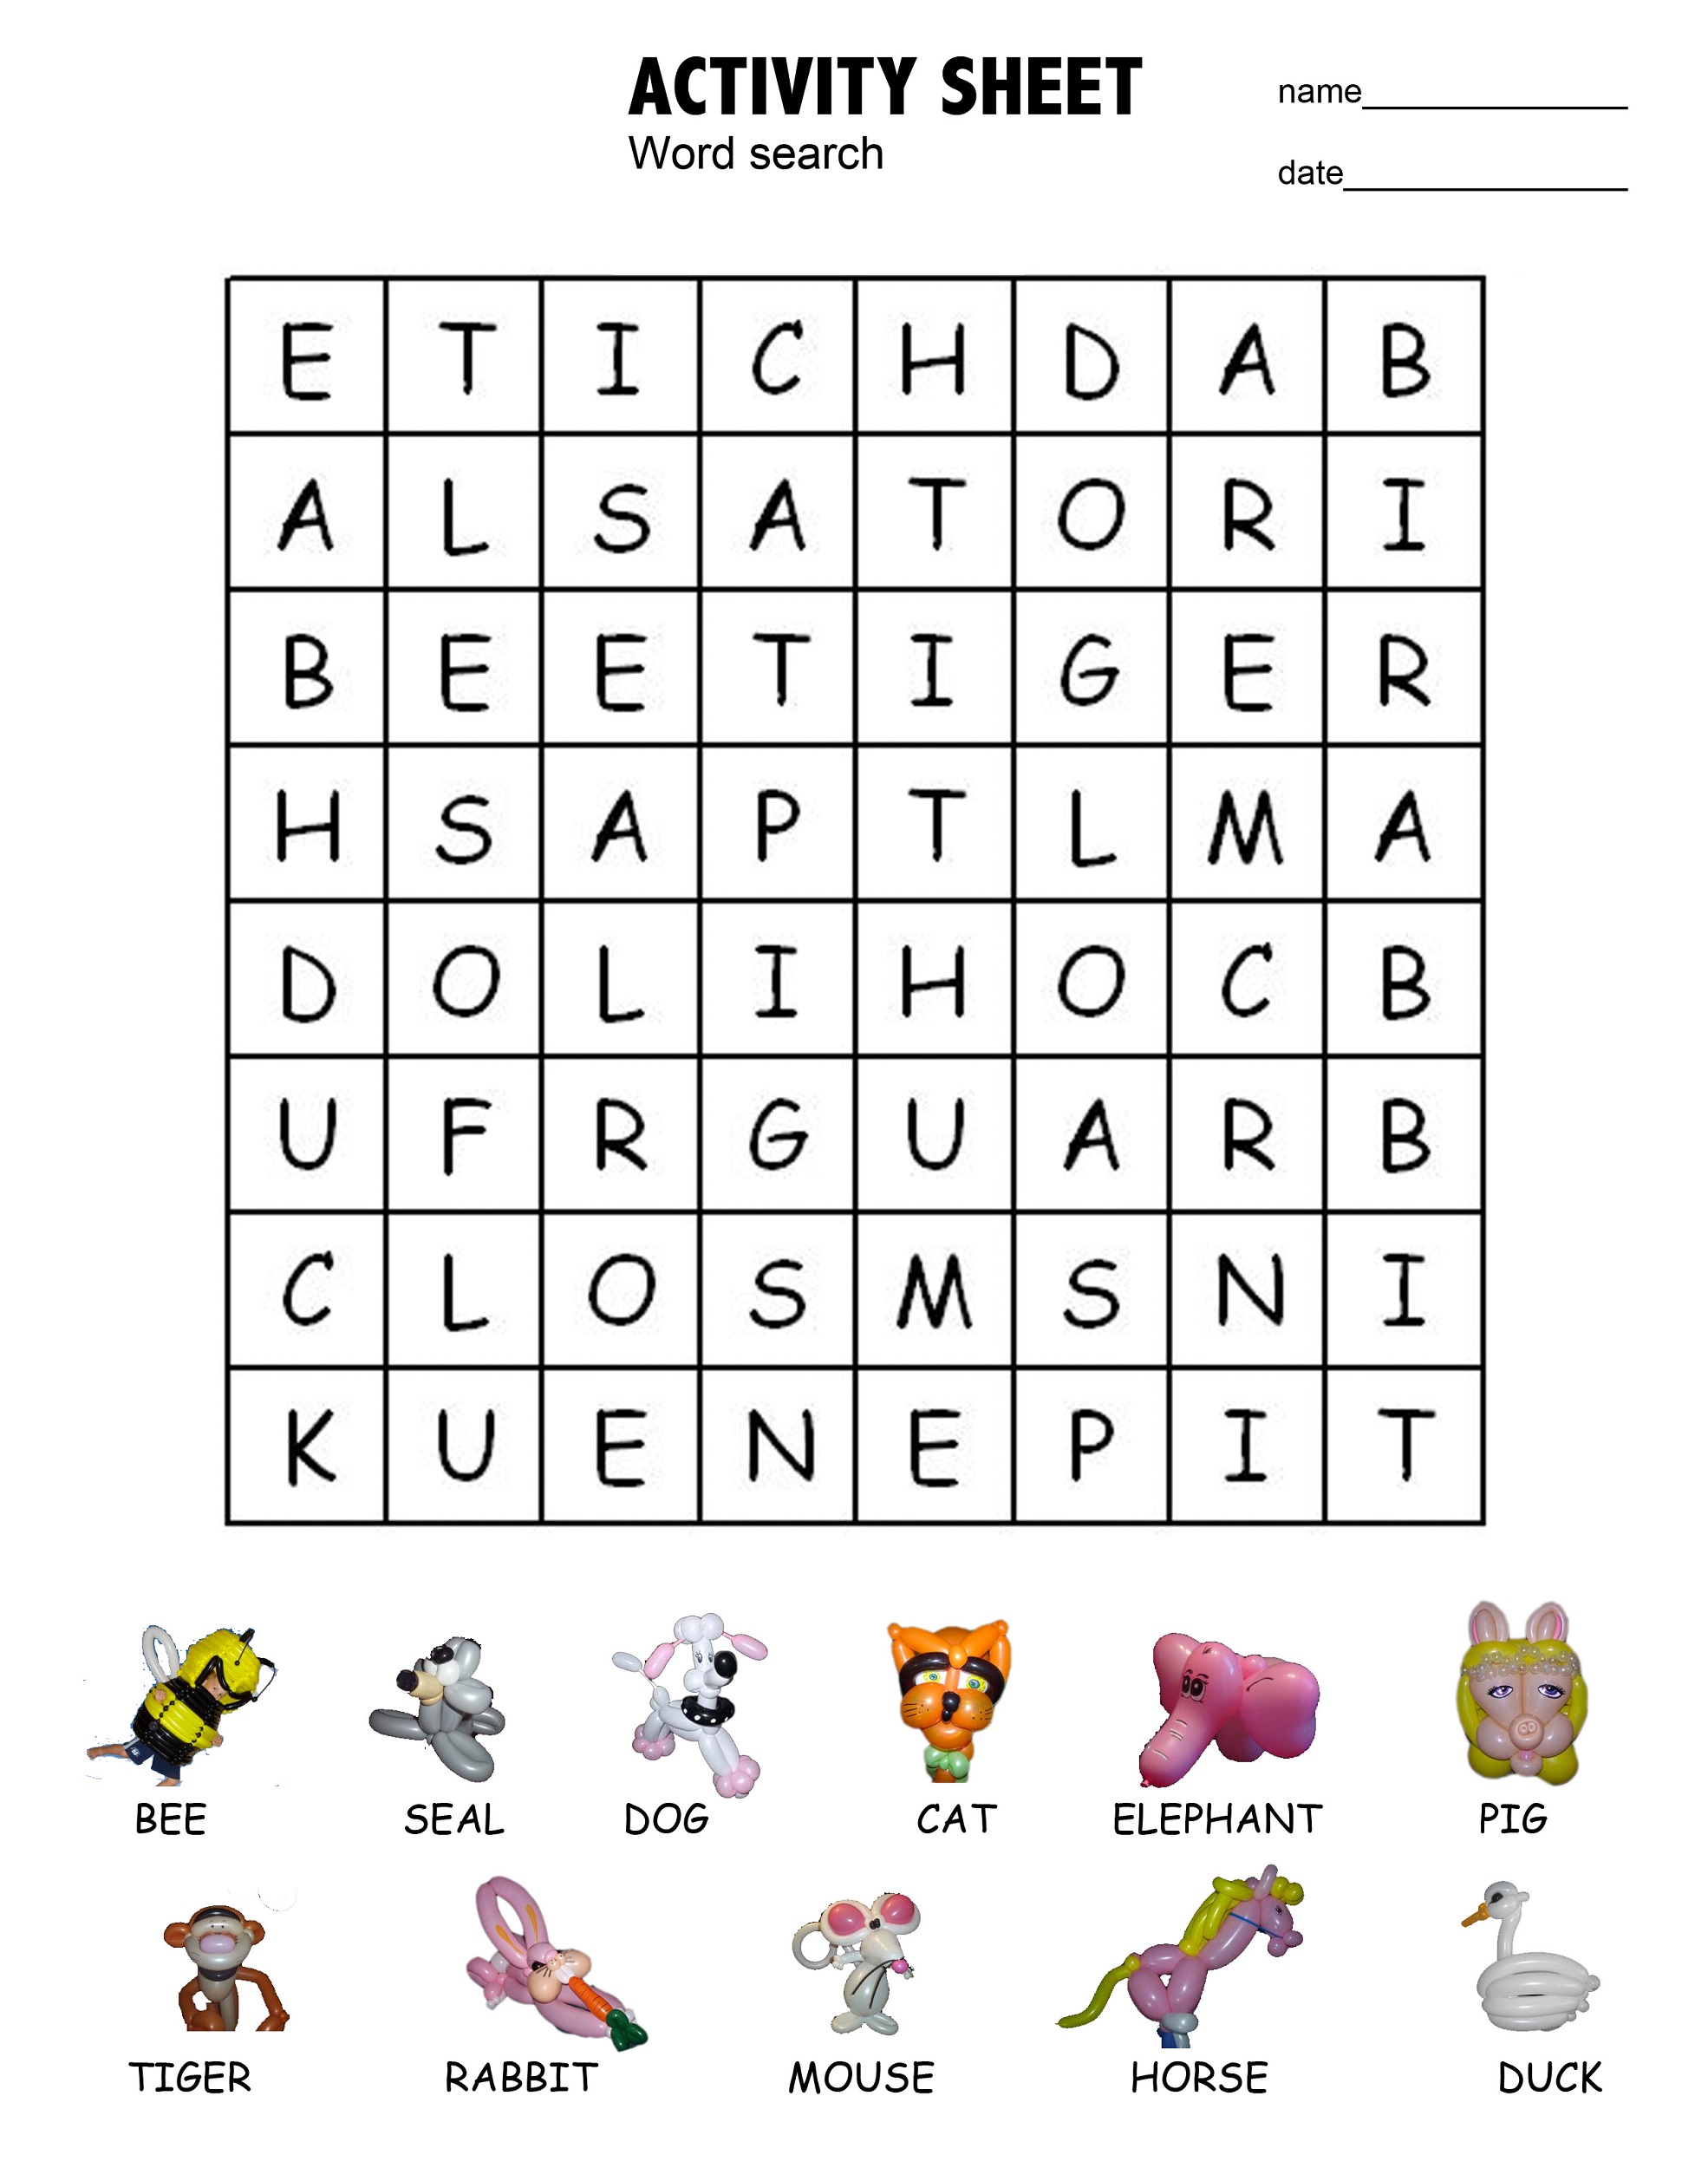 10-best-100-word-word-searches-printable-printableecom-10-free-printable-word-search-puzzles